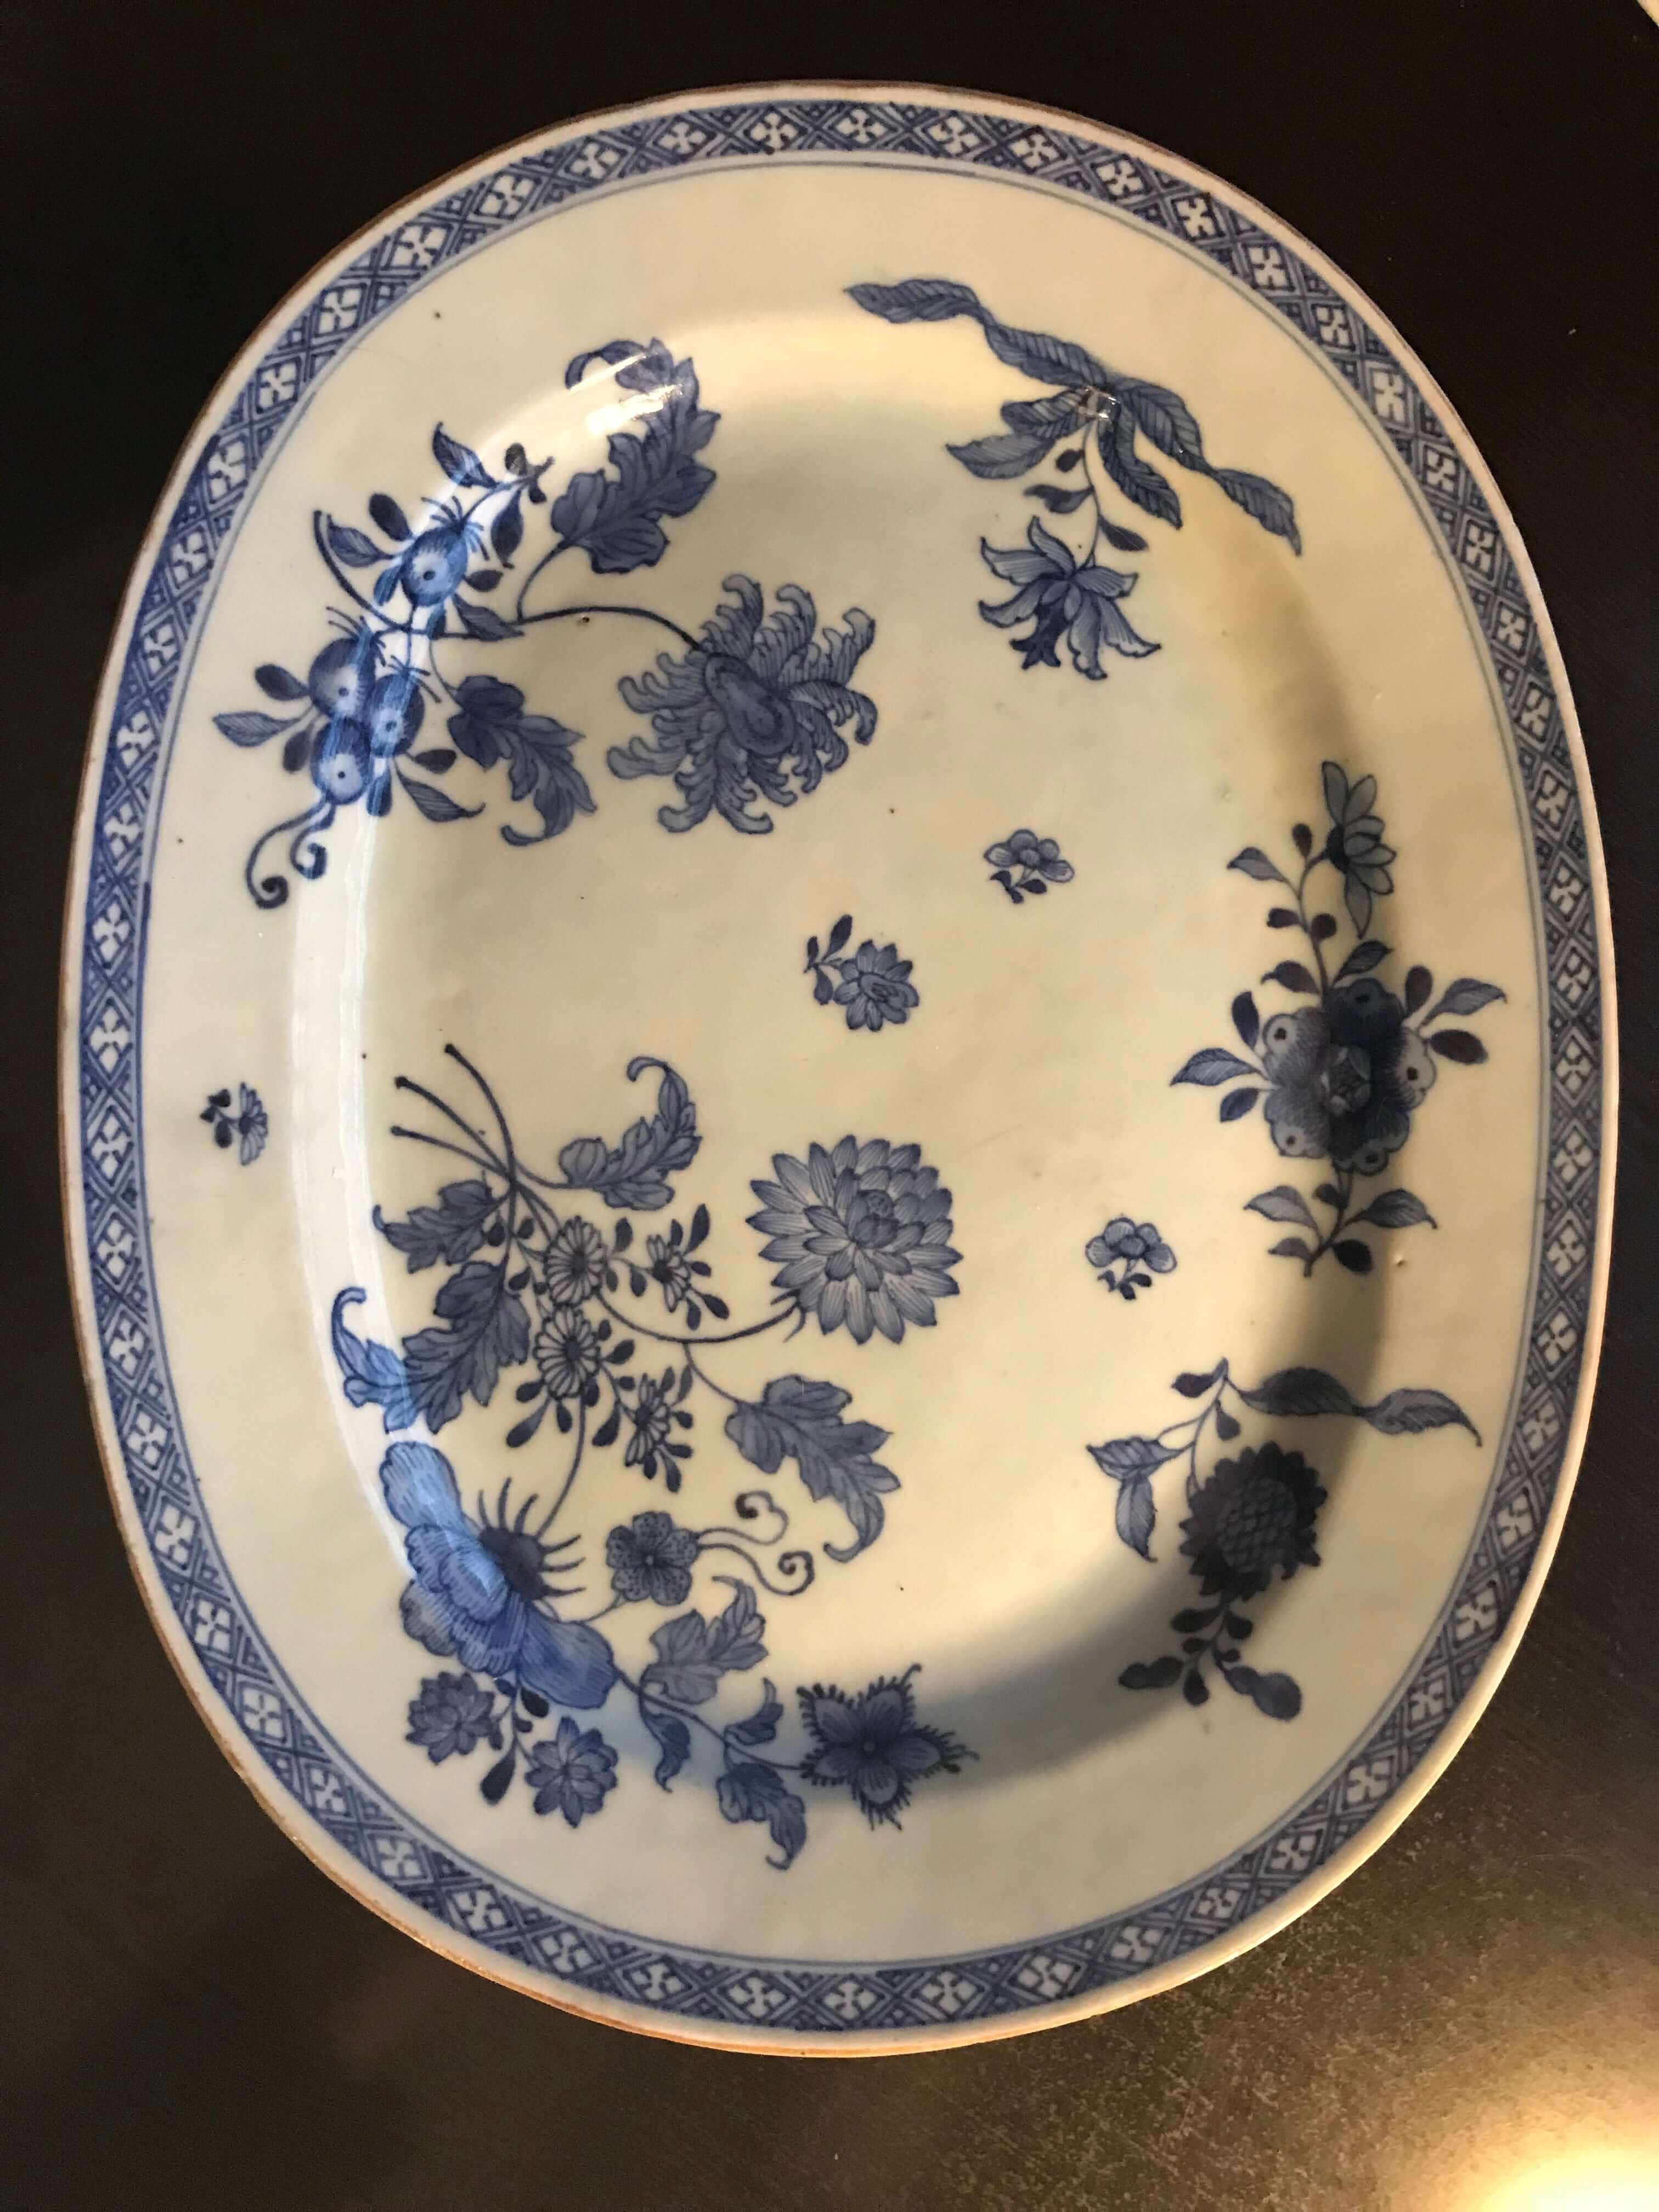 1780s Chinese Blue and White Export Porcelain Platter